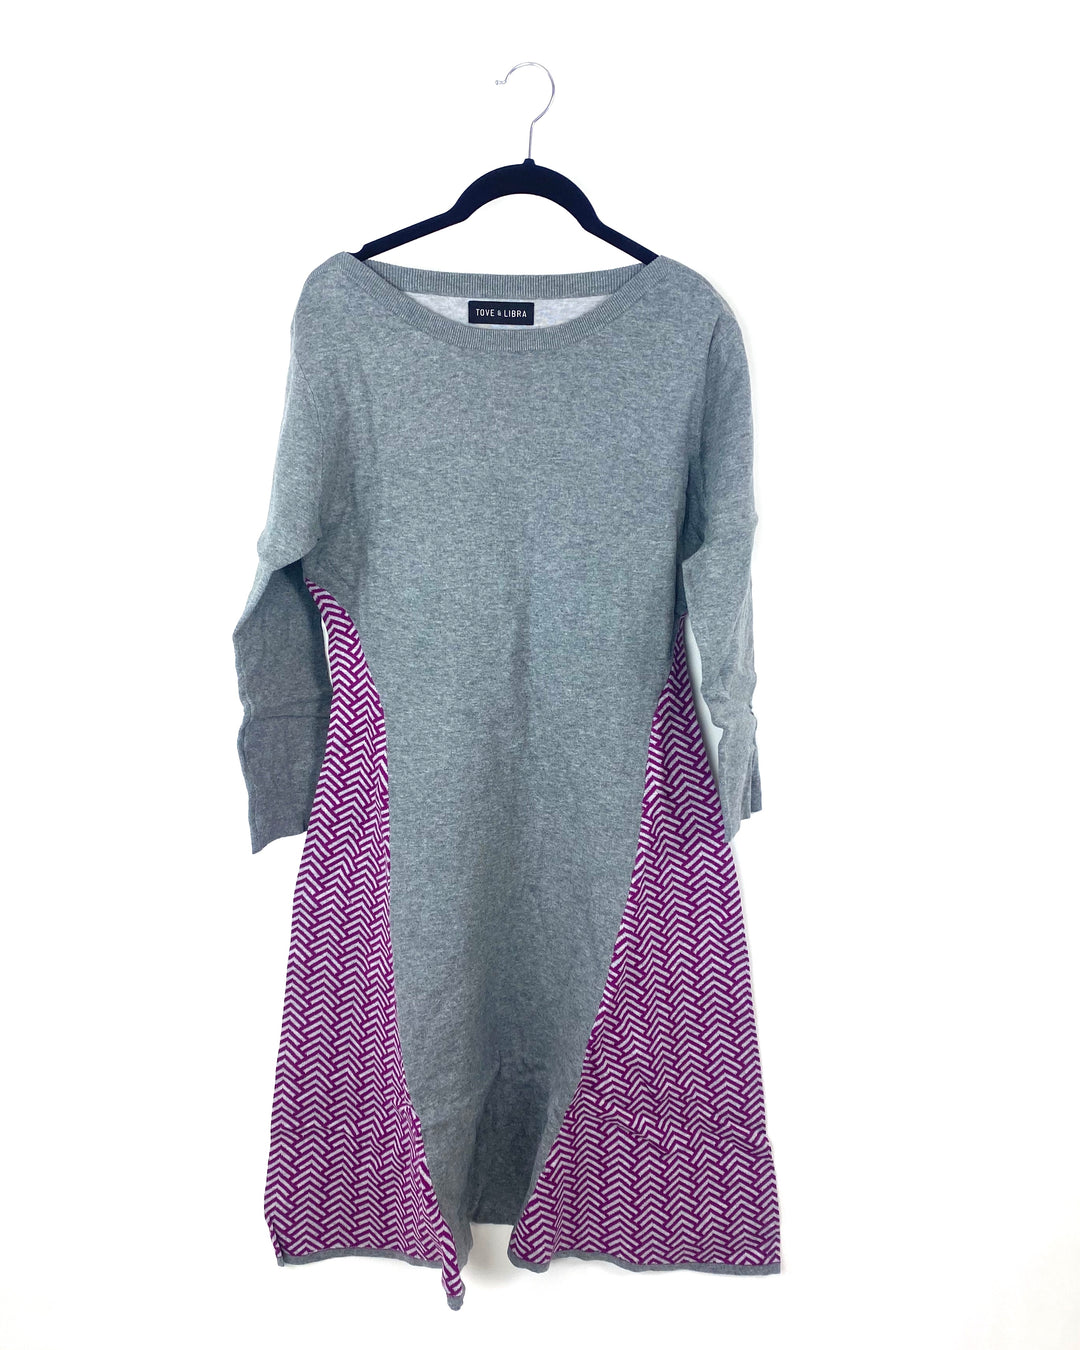 Fit And Flared Gray And Purple Dress - Size 2, 4, 6 and 8